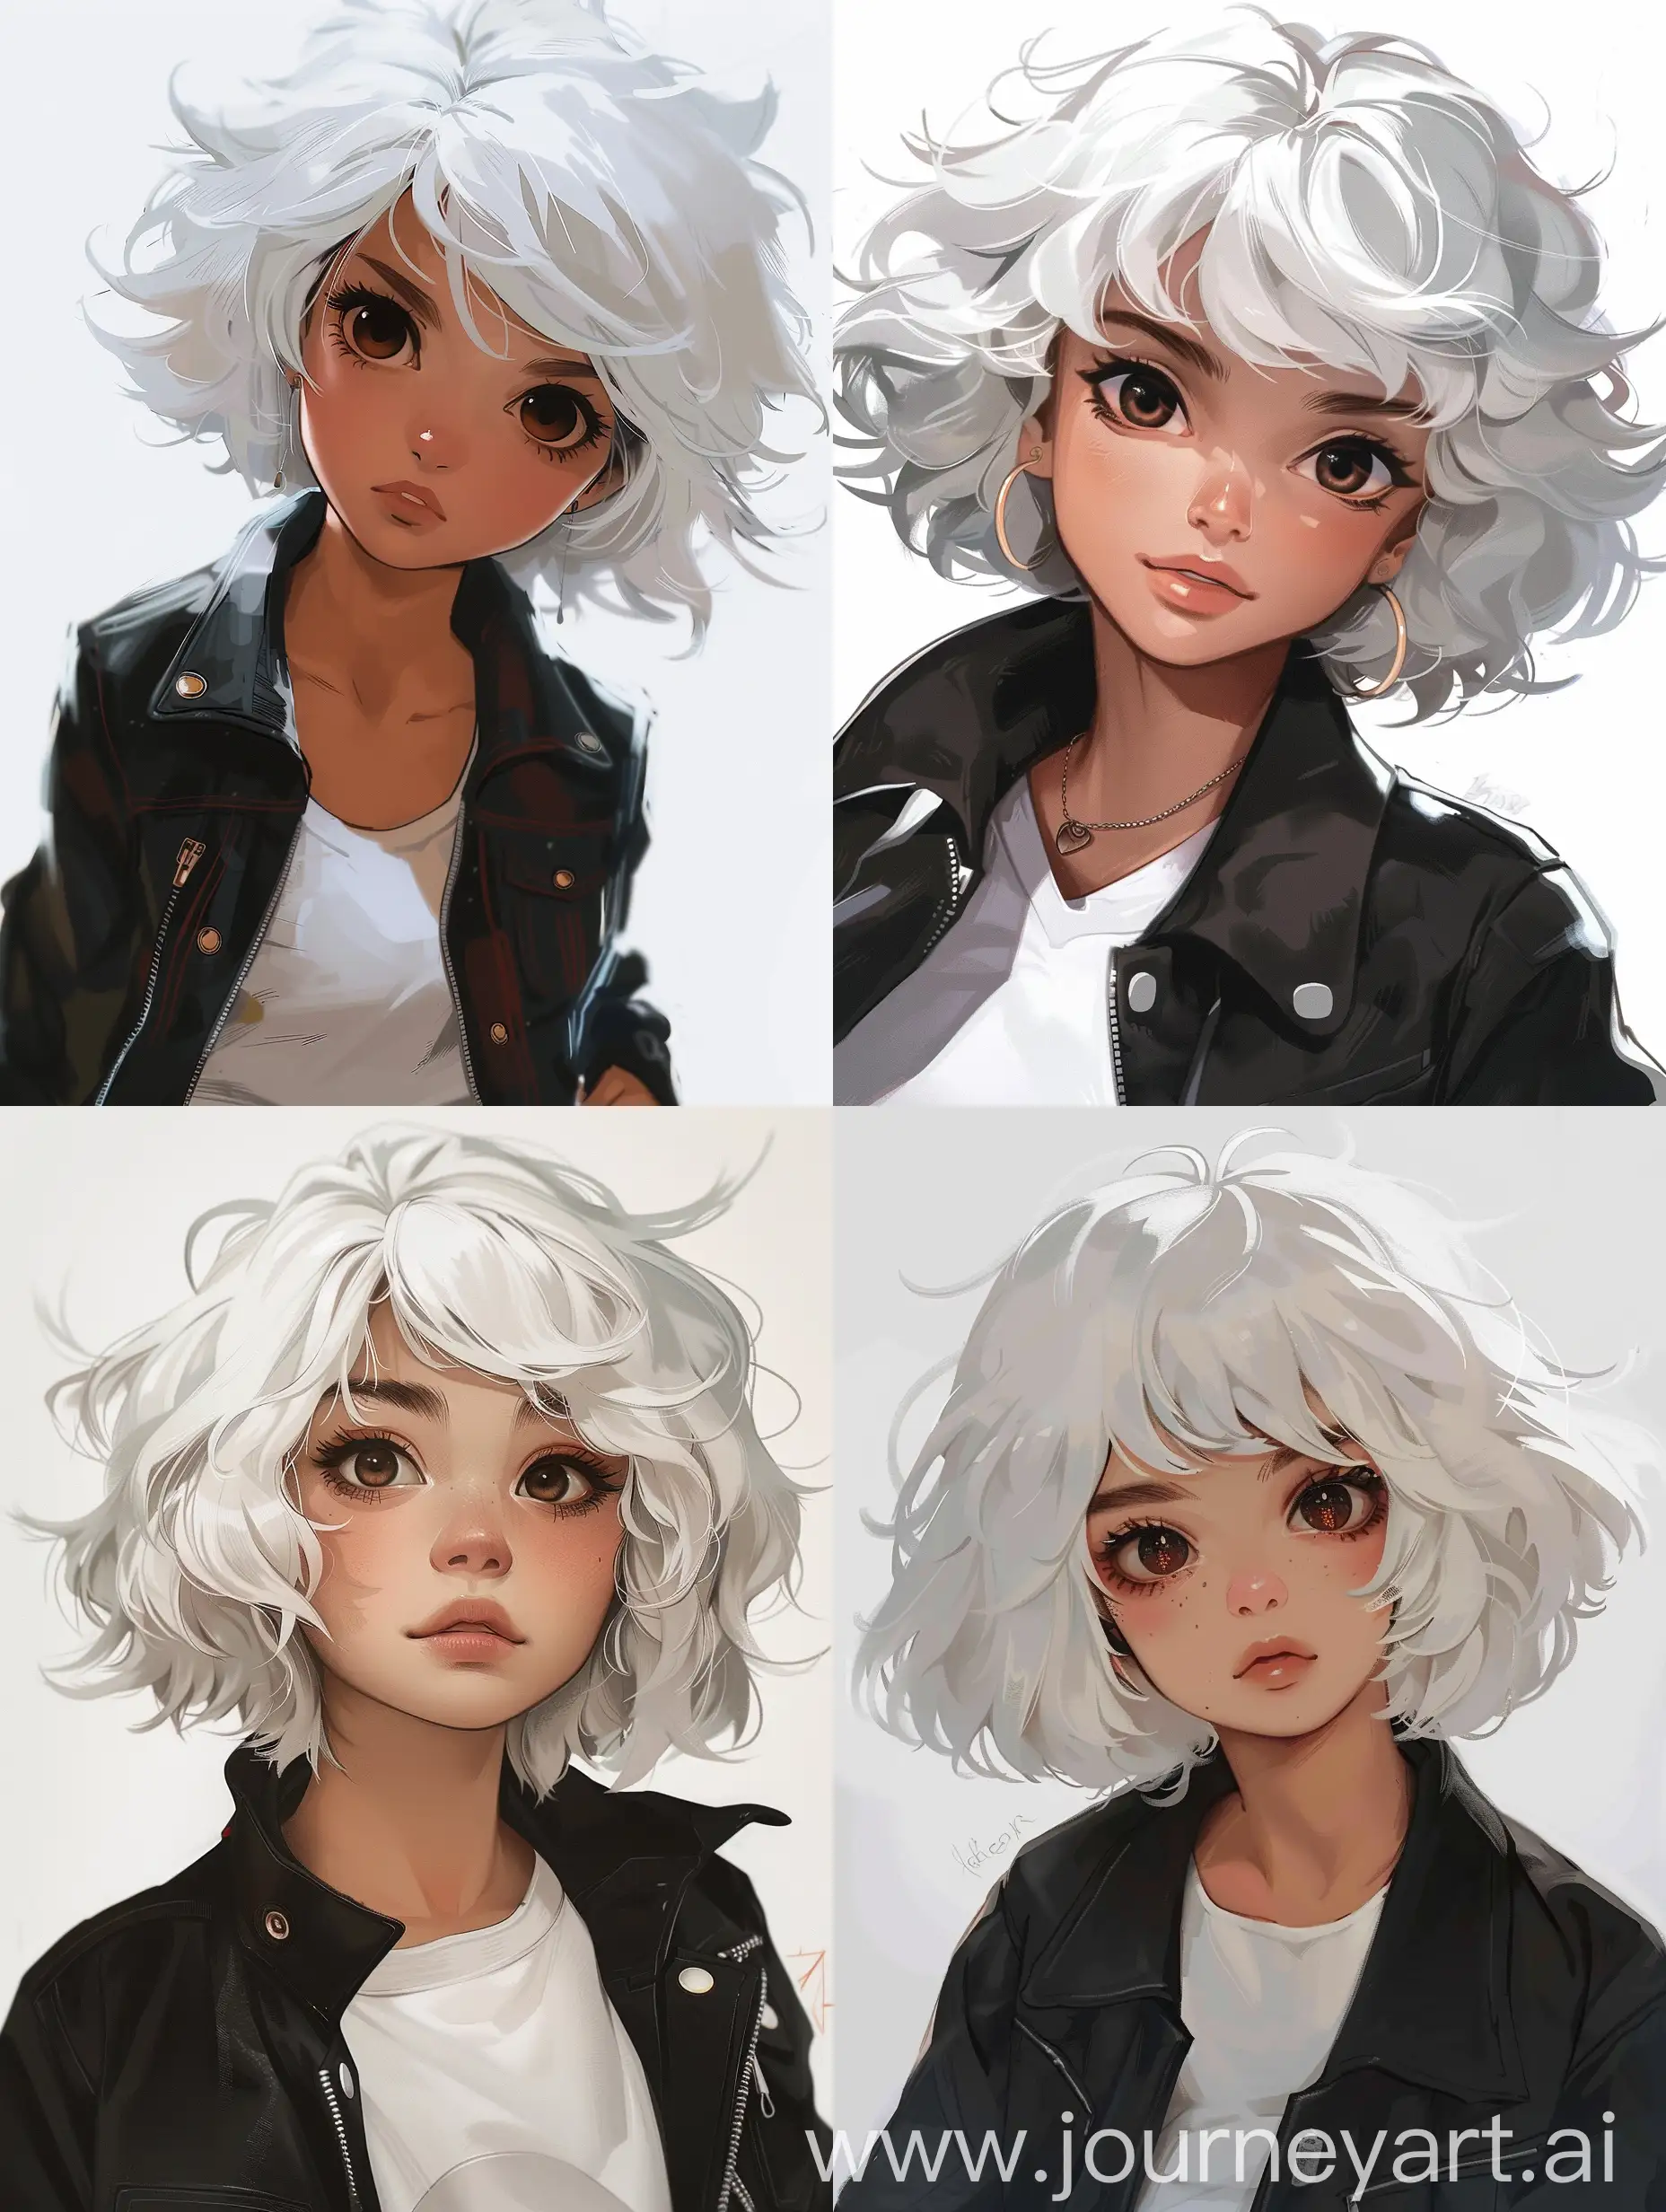 anime, muted colors, cute, badass, beautiful young woman, fluffy short white hair, brown eyes, black jacket, white t-shirt, white background, close up, character design, retro style, aesthetic, masterpiece